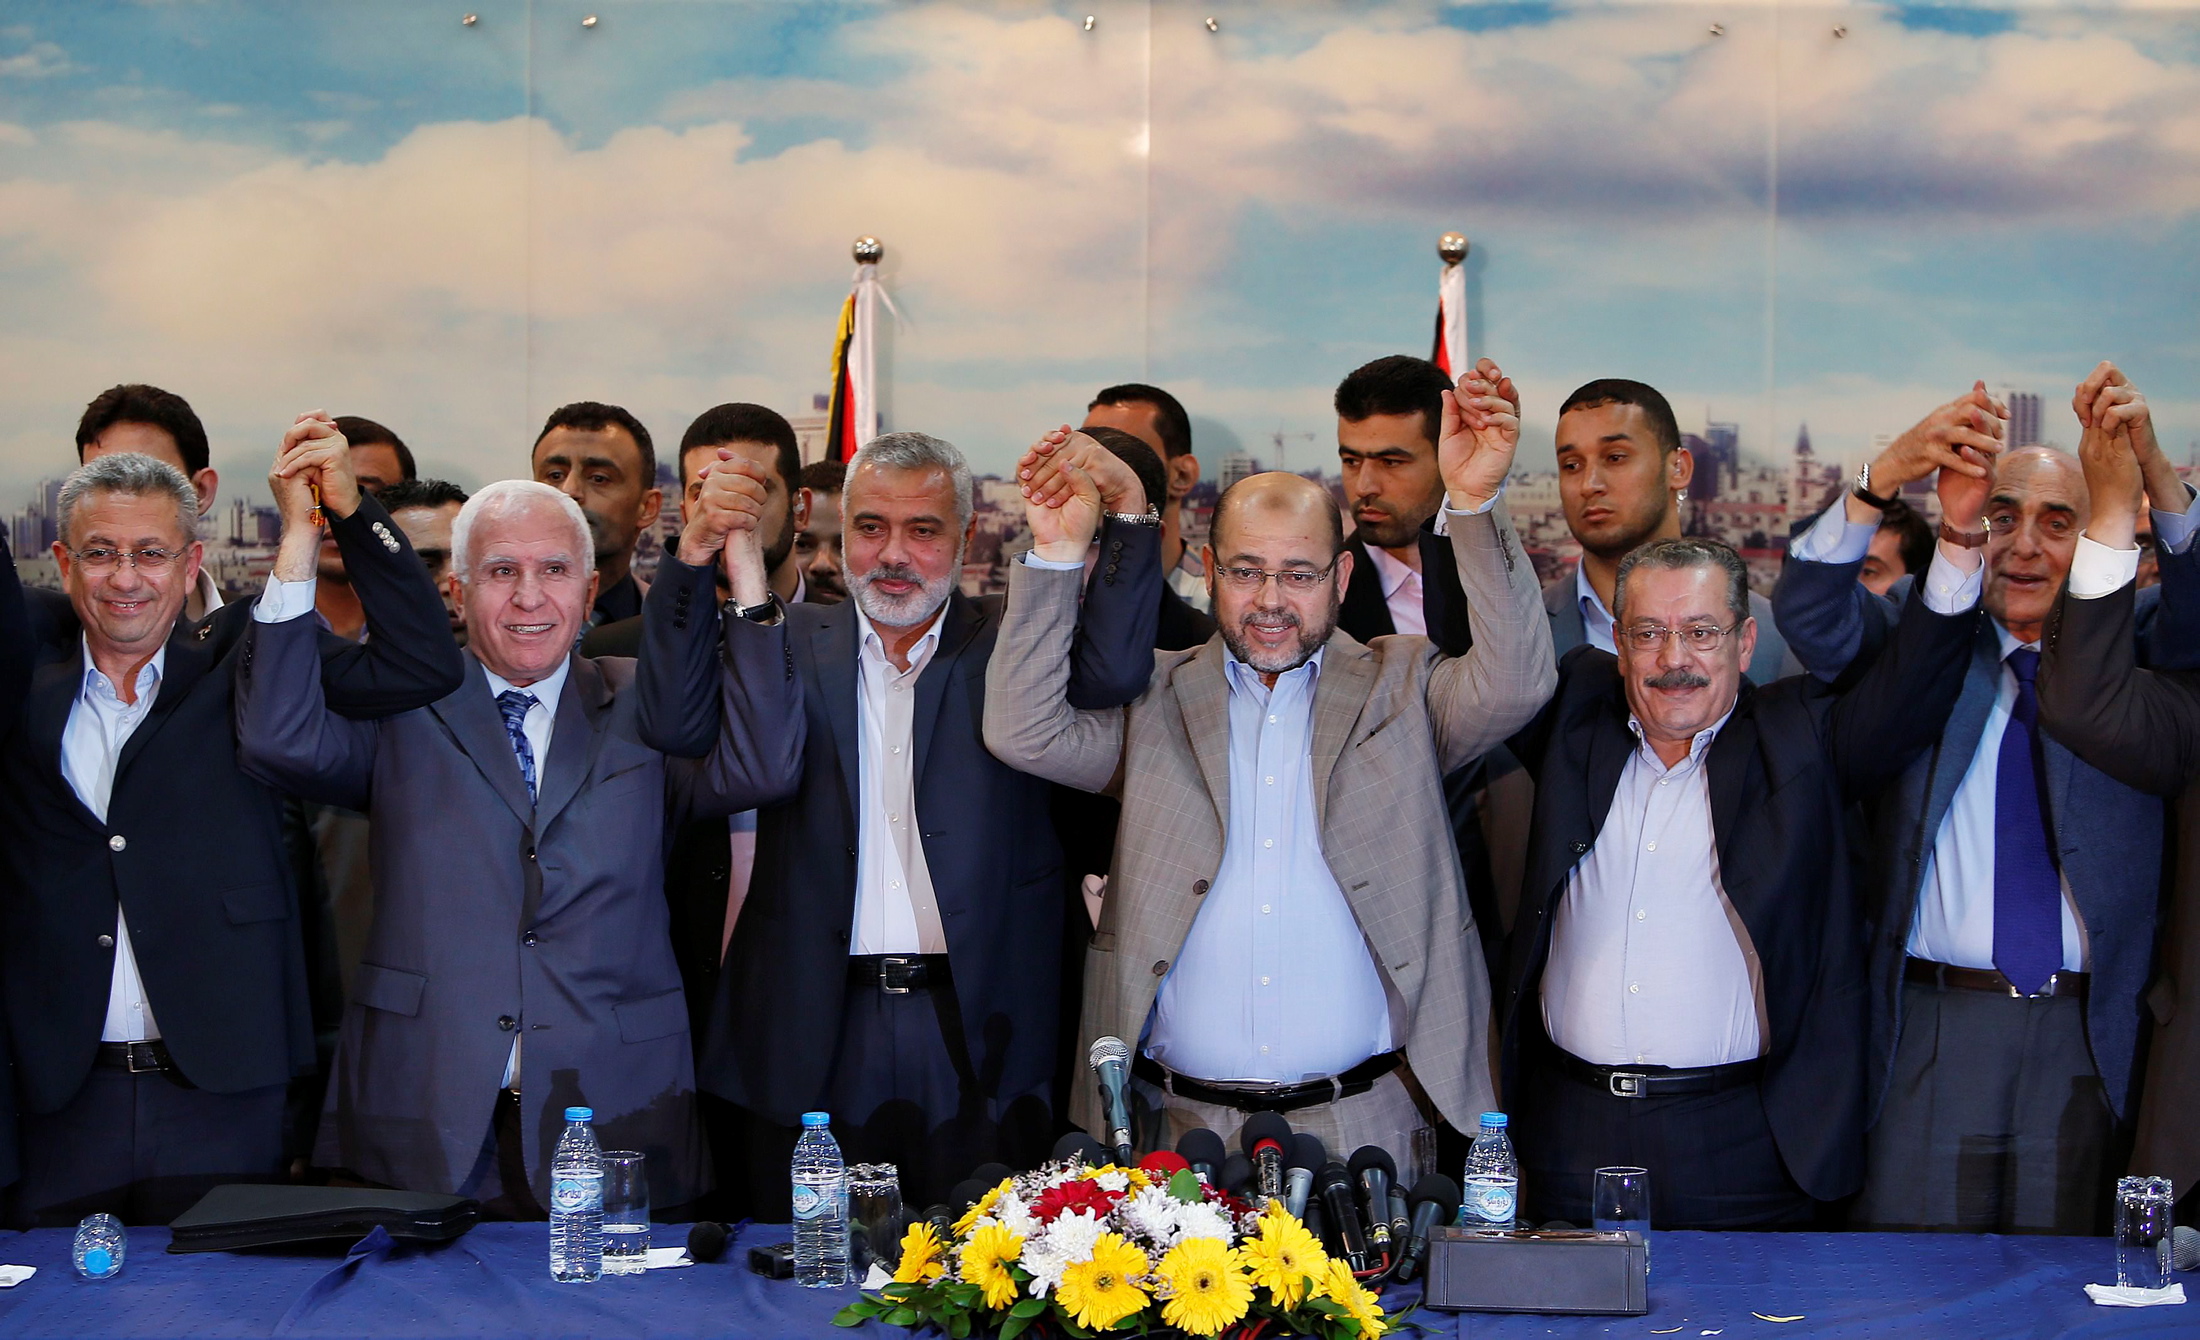 Senior Fatah official Azzam Al-Ahmed (2nd L), head of the Hamas government Ismail Haniyeh (3rd L) and senior Hamas leader Moussa Abu Marzouq (4th L) , hold their hands after announcing a reconciliation agreement in Gaza City April 23, 2014. The Gaza-based Islamist group Hamas and President Mahmoud Abbas's Palestine Liberation Organization (PLO) agreed on Wednesday to implement a unity pact, both sides announced in a joint news conference.REUTERS/Suhaib Salem (GAZA - Tags: MILITARY POLITICS TPX IMAGES OF THE DAY) ארגון חמאס ו פתח חתמו על הסכם ליישום הפיוס ביניהם טקס חתימה ב עזה